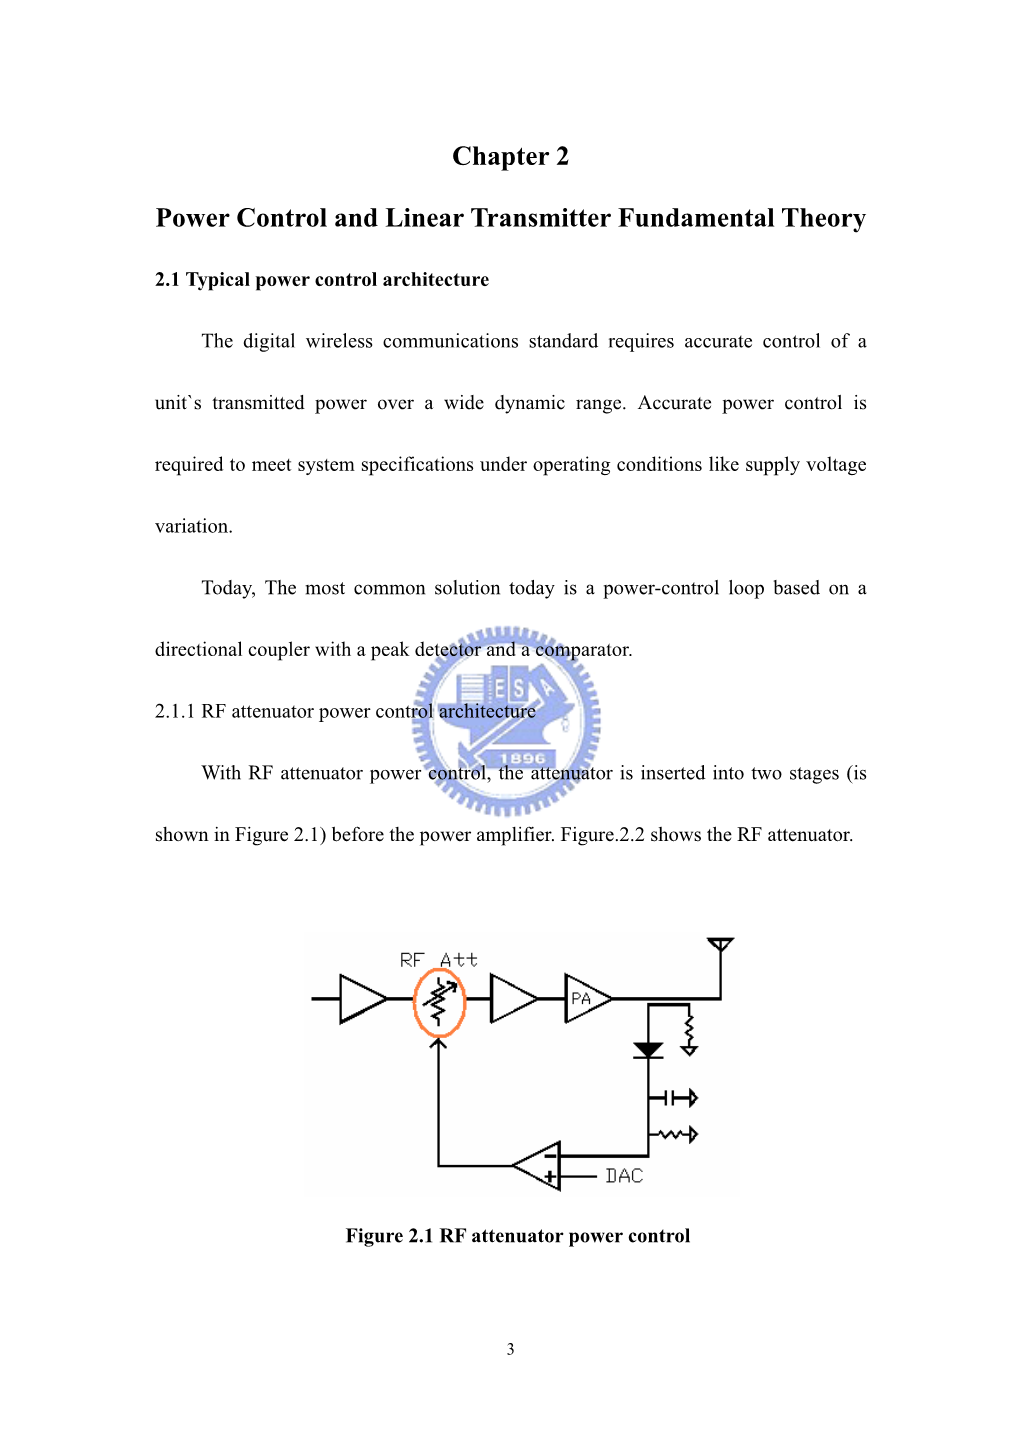 Chapter 2 Power Control and Linear Transmitter Fundamental Theory